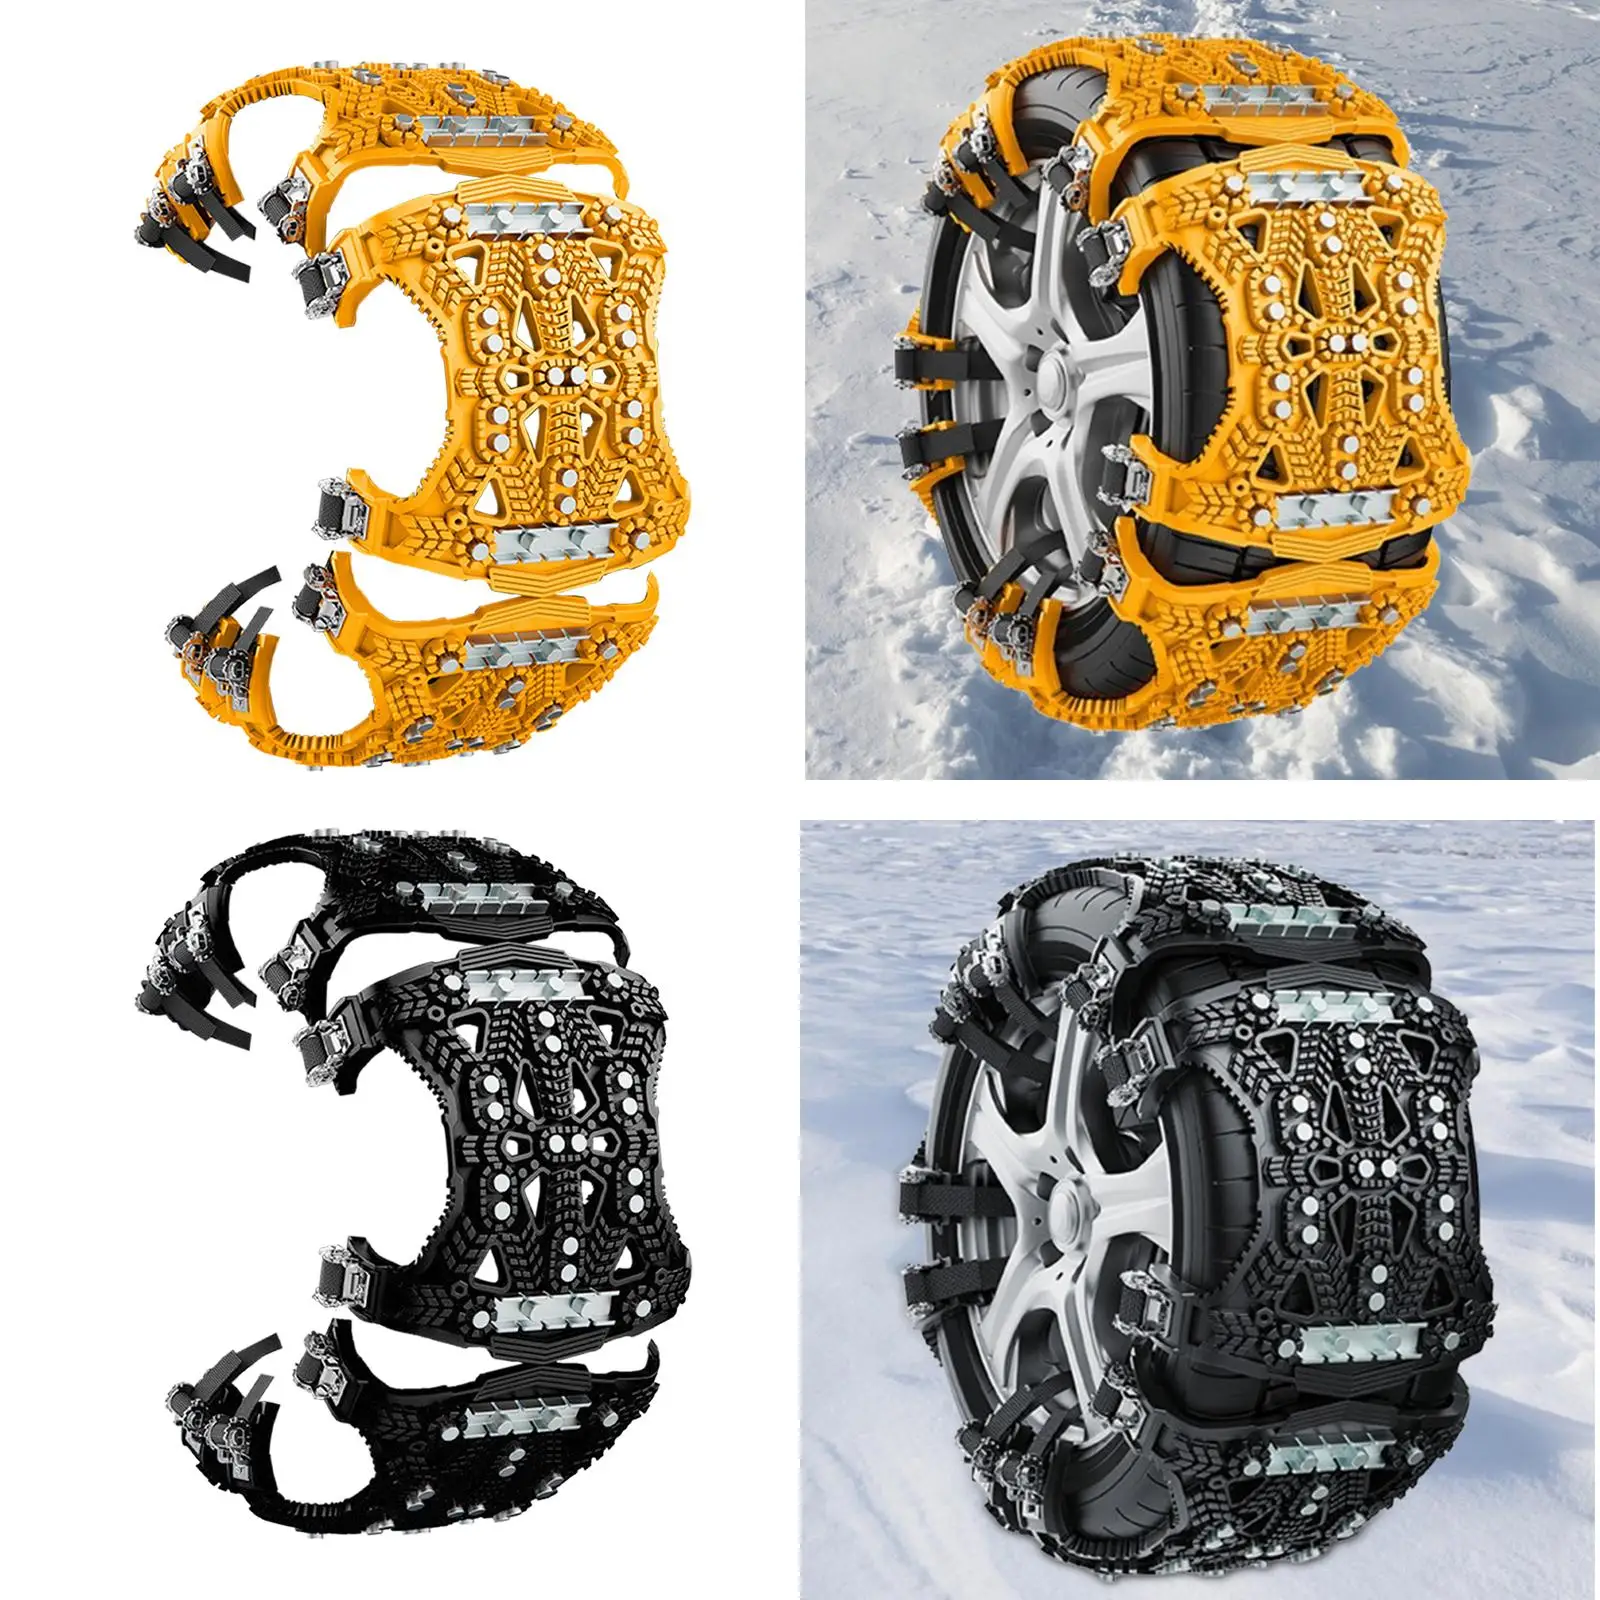 Vehicle Car Tyres Anti Slip Snow Chain Easily Mount Winter Security Chain Portable for SUV Trucks ATV Durable Lightweight